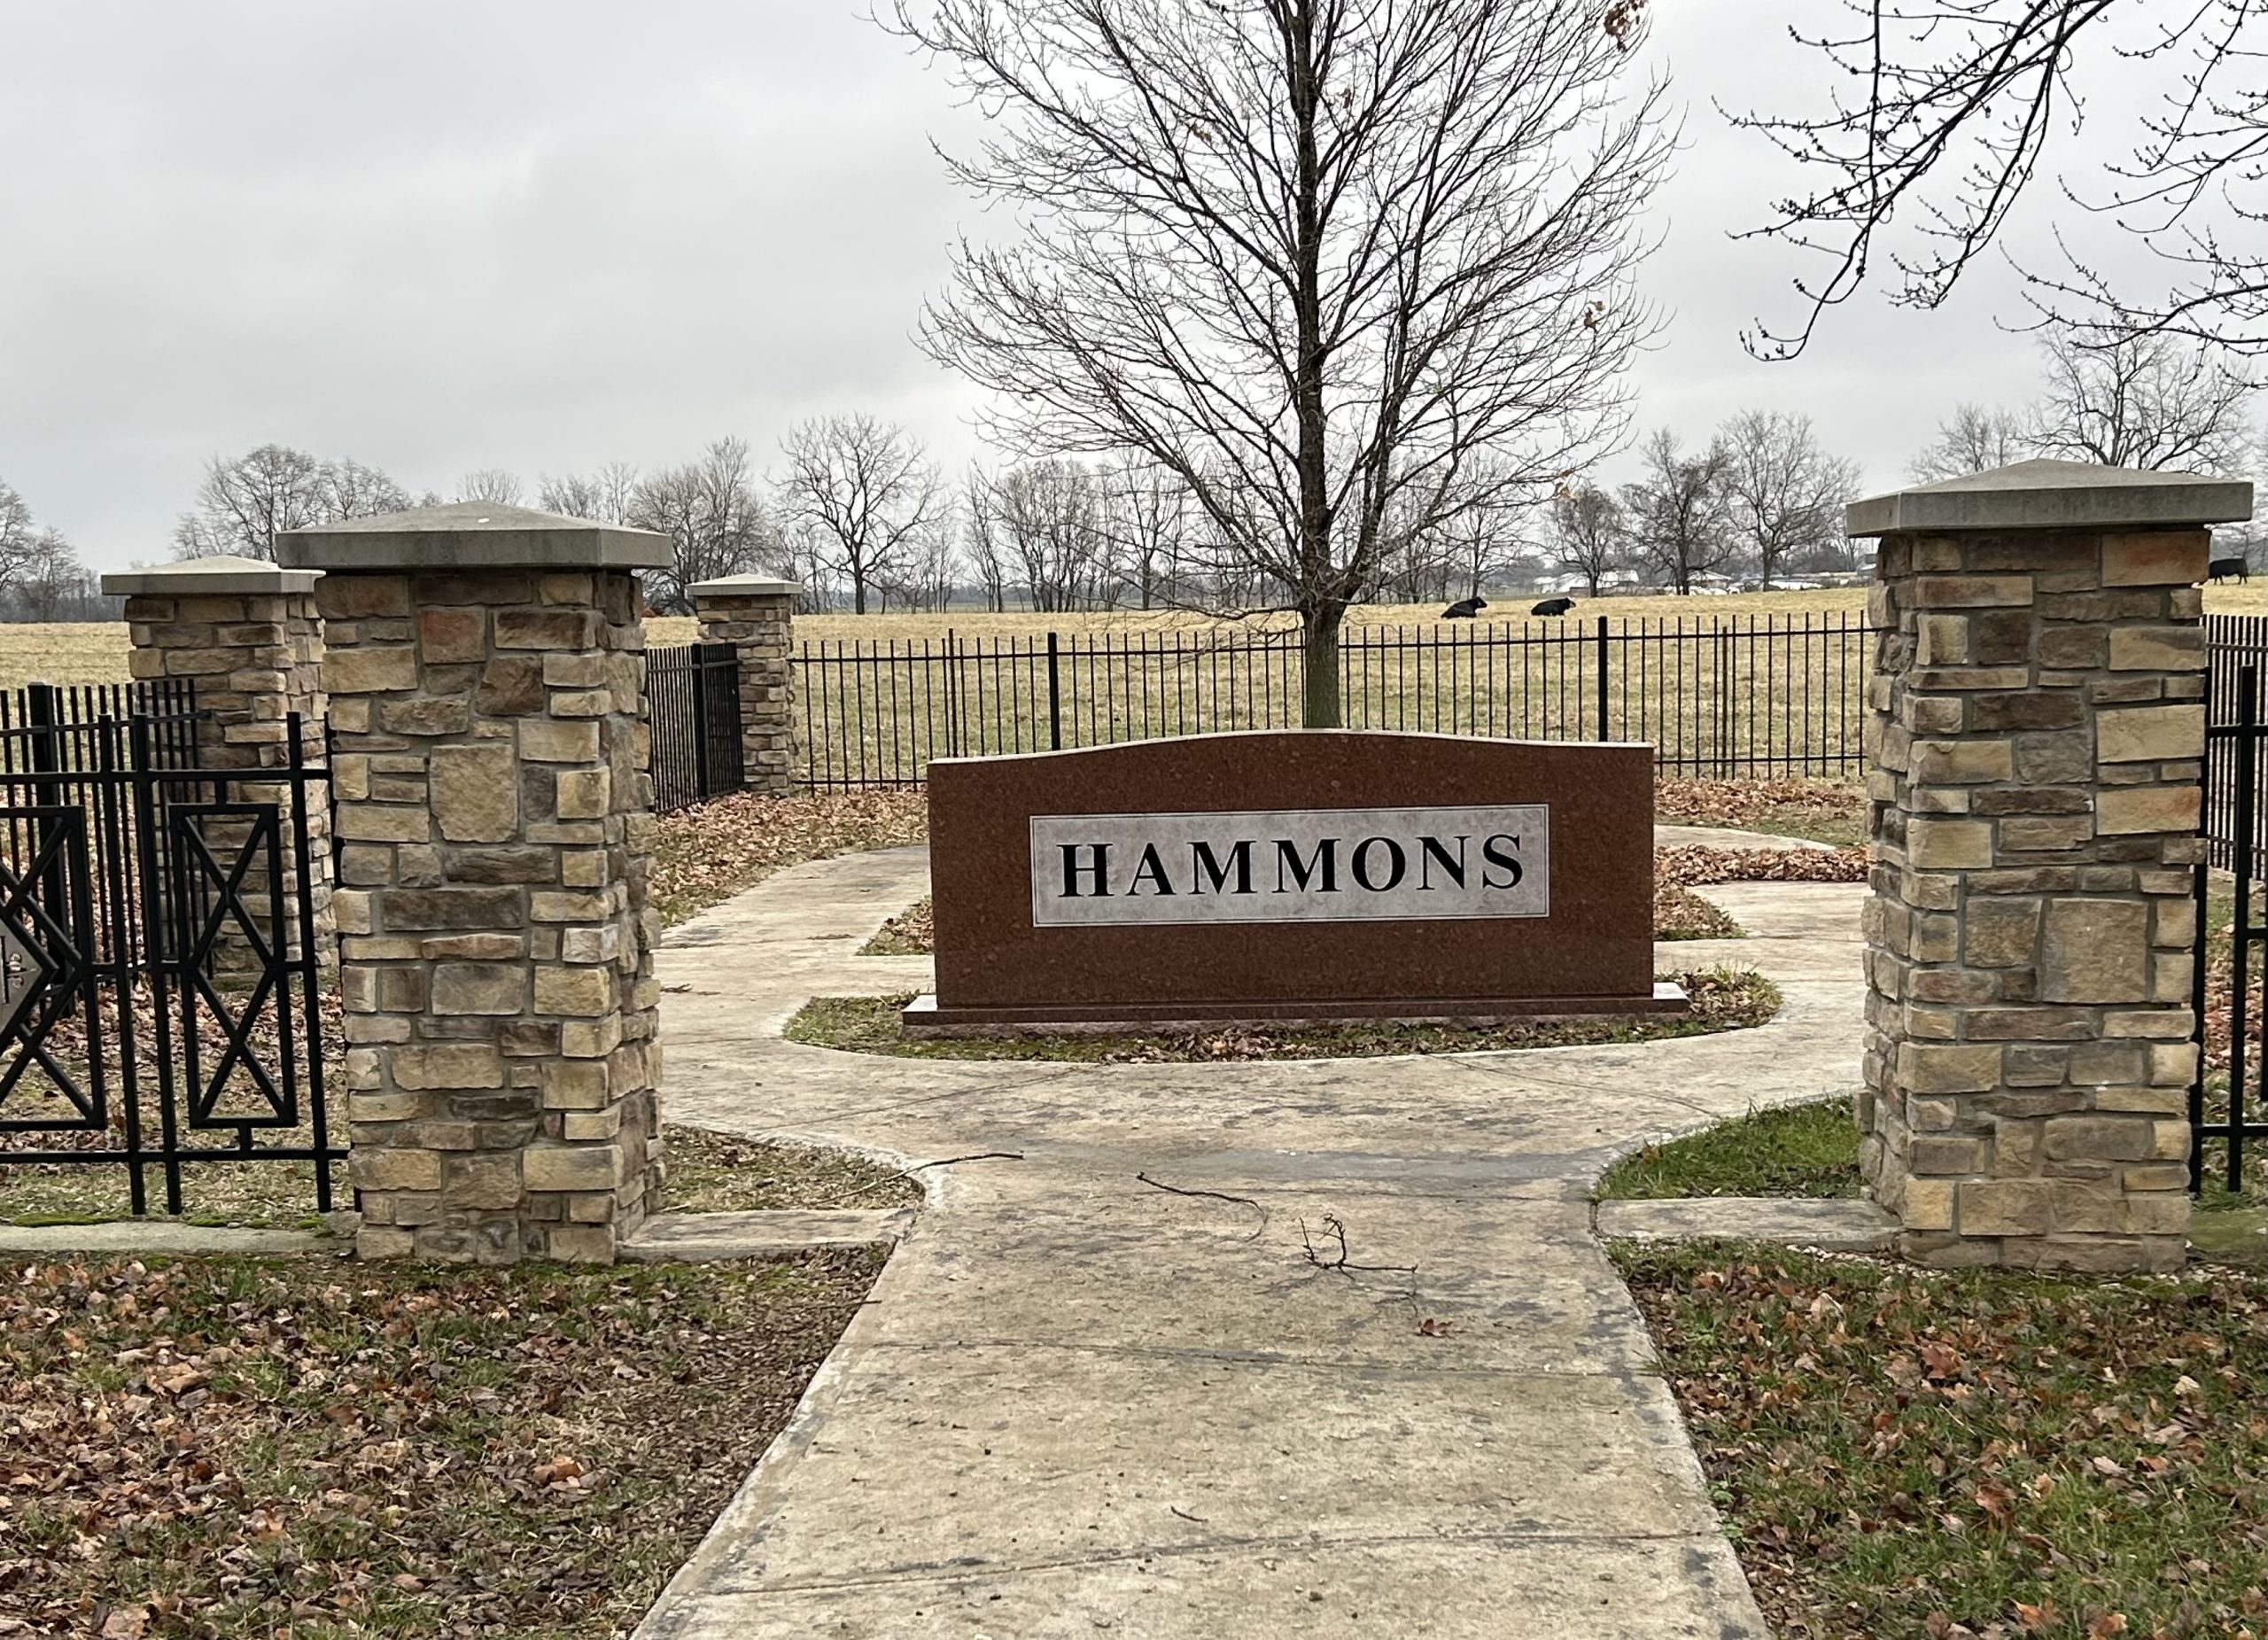 John Q. Hammons and Juanita K. Hammons are buried in a rural cemetery in Newton County. (Photo by Steve Pokin)